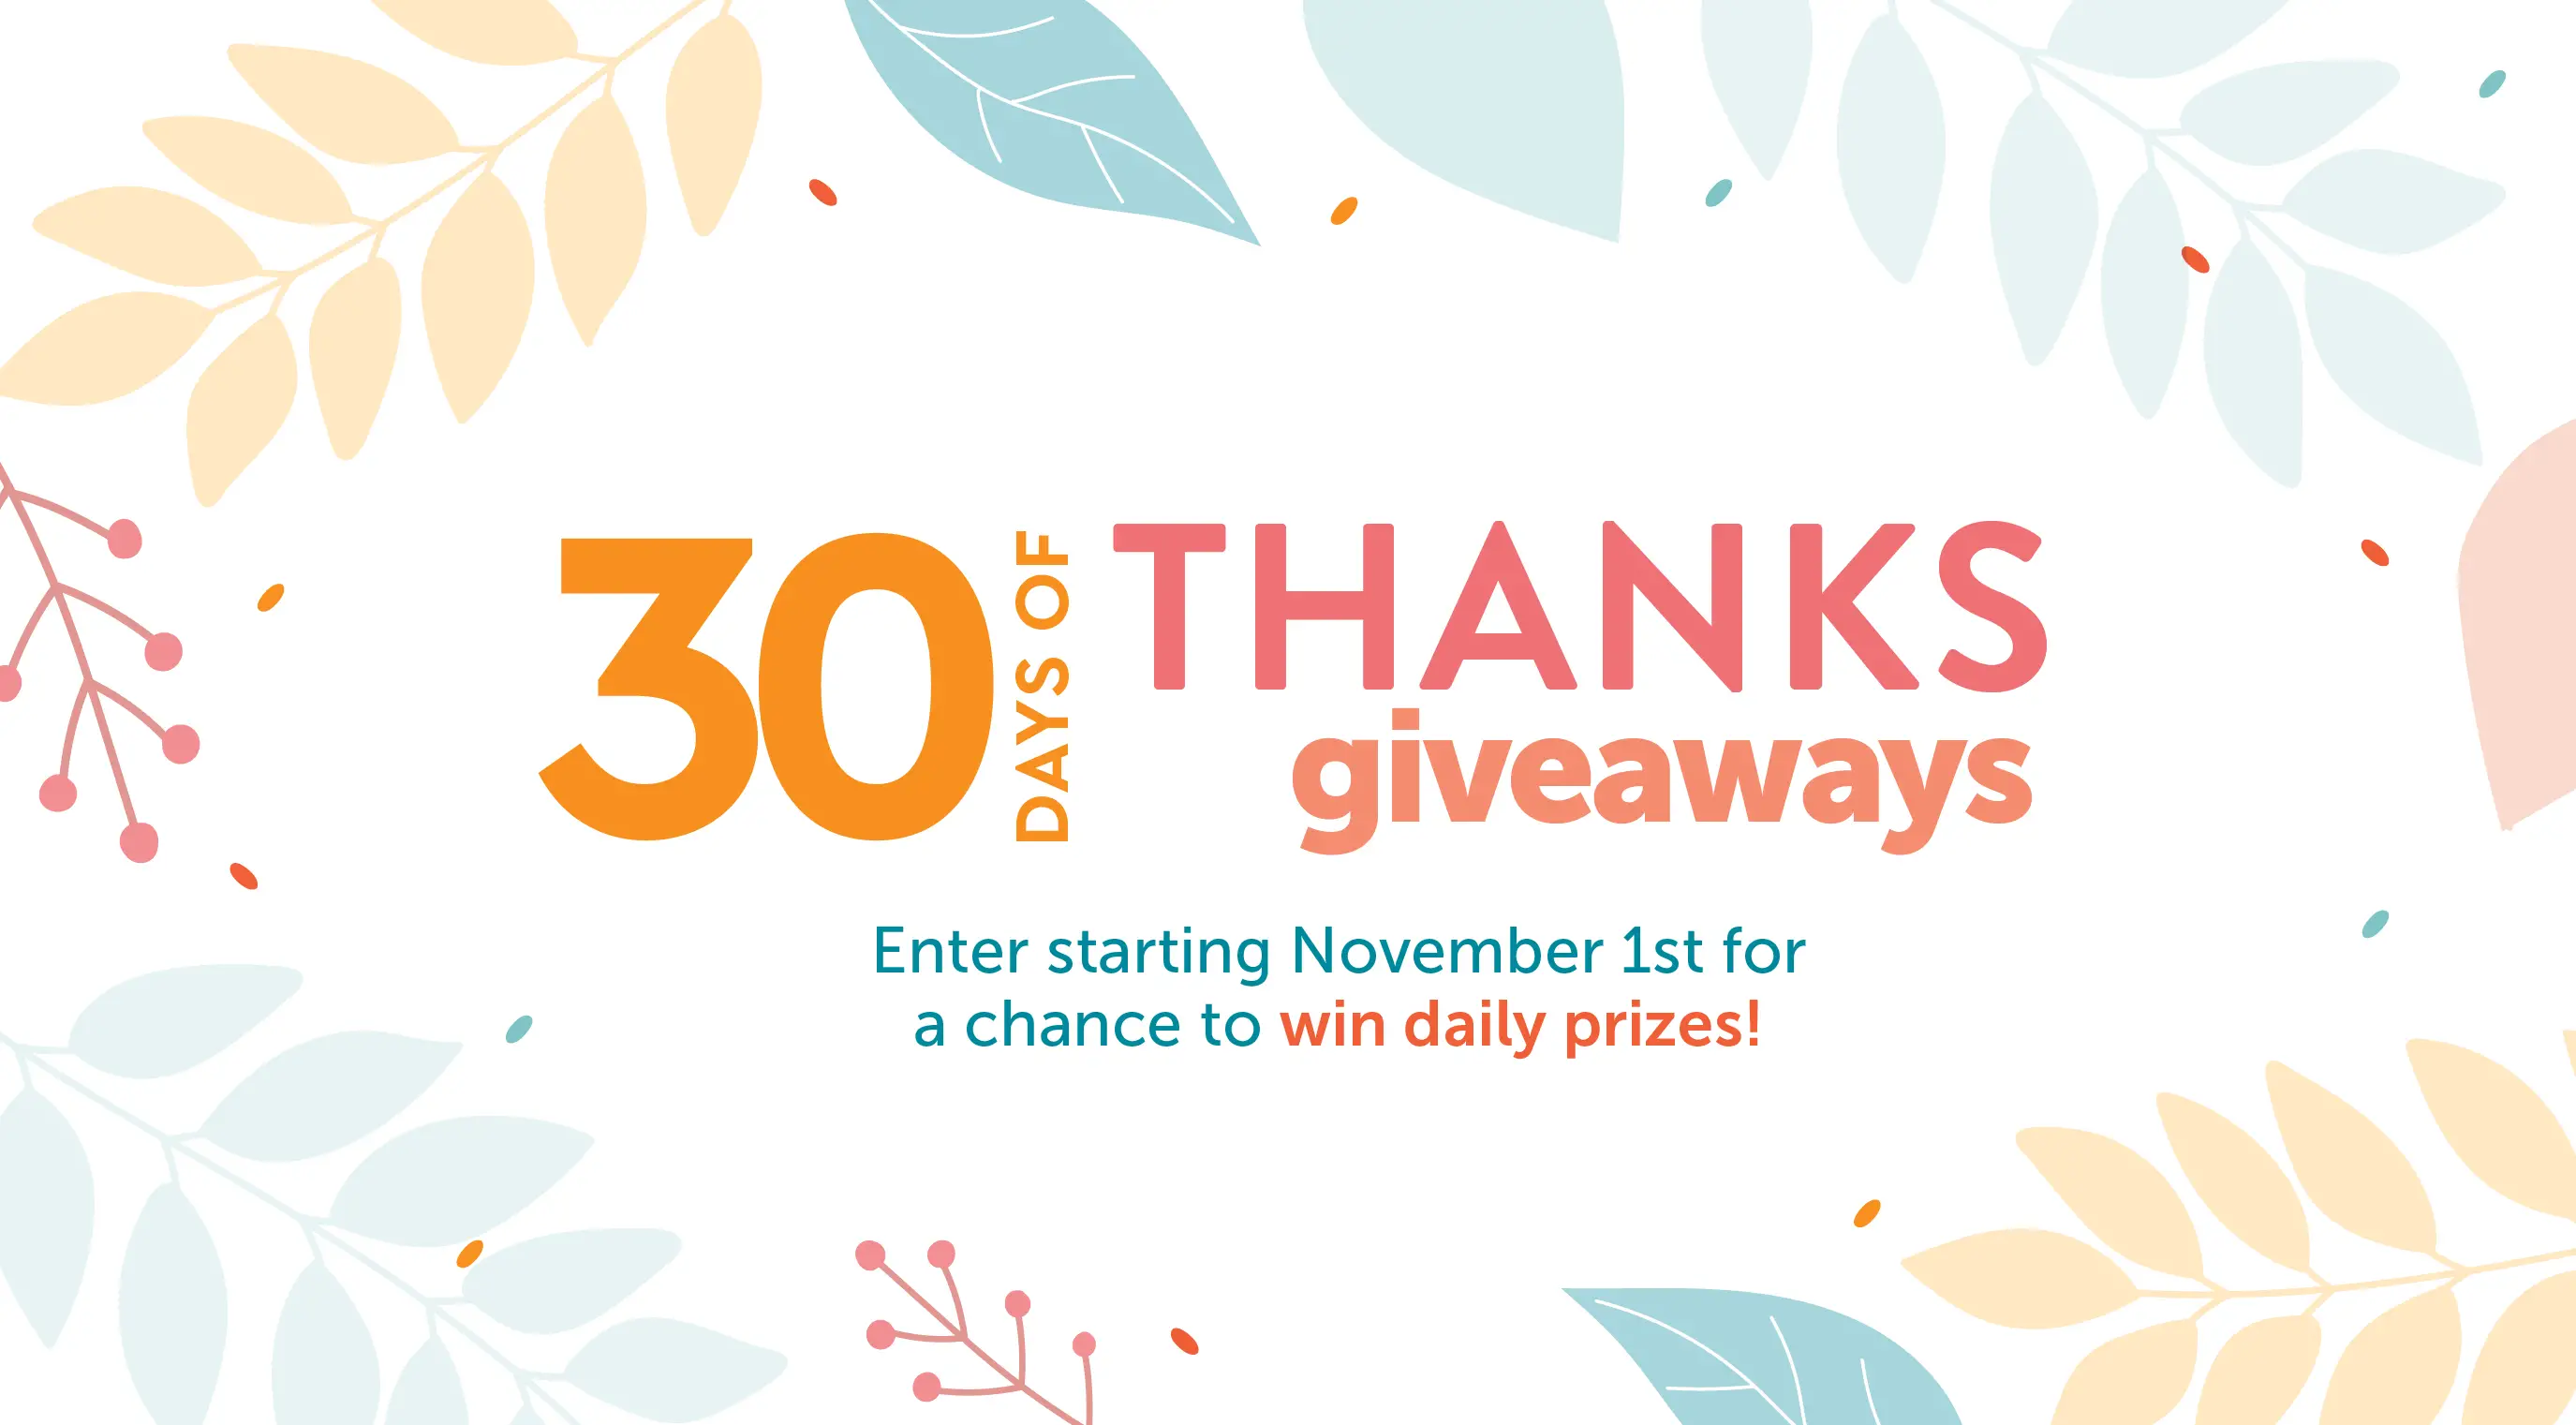 Make the most of autumn by entering to win unbe-leaf-able daily prizes this November. Each day you enter, you increase the chances of winning the GRAND PRIZE: A SEASONAL SHOPPING SPREE WORTH $500!